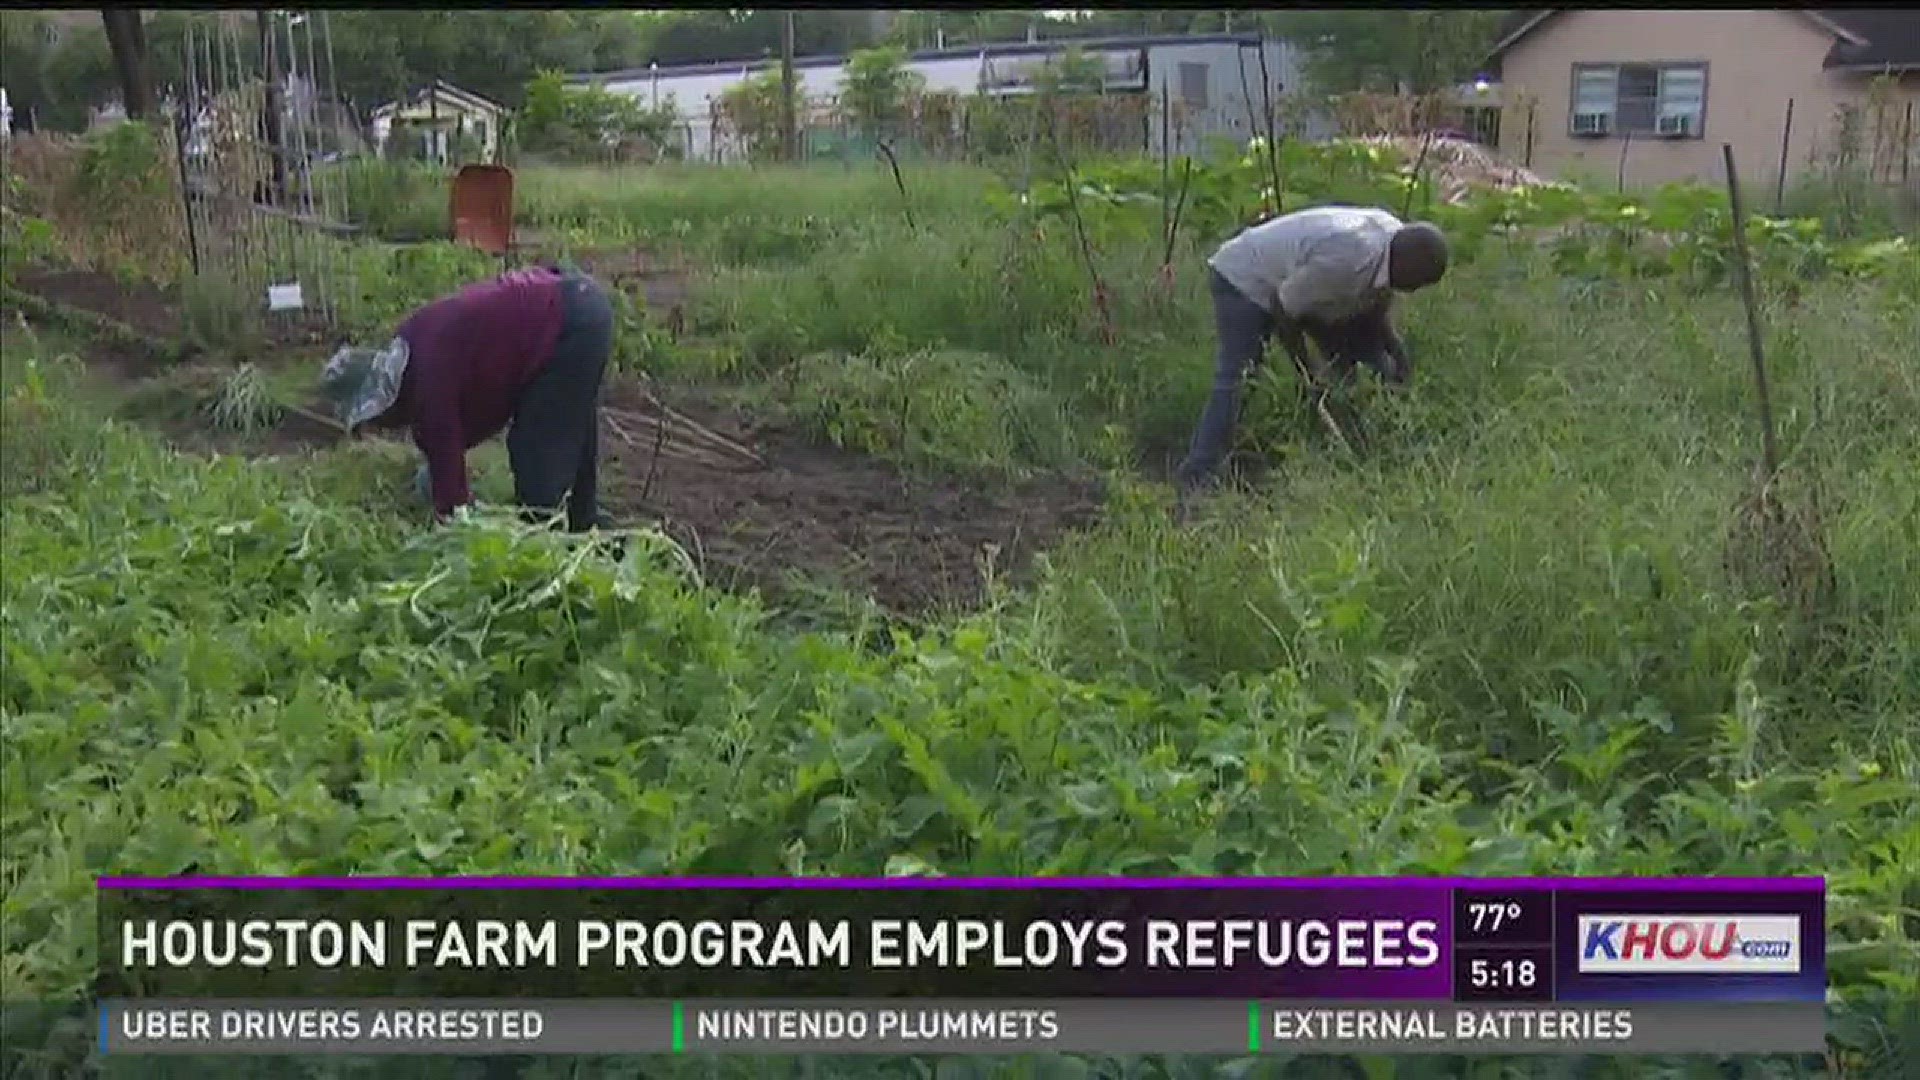 If you like to eat organic produce and you want to help some of our city's newest residents, you should check out a program called Plant it Forward. "Plant It Forward is a non-profit based in Houston that aims to employ refugees through urban farming," sa